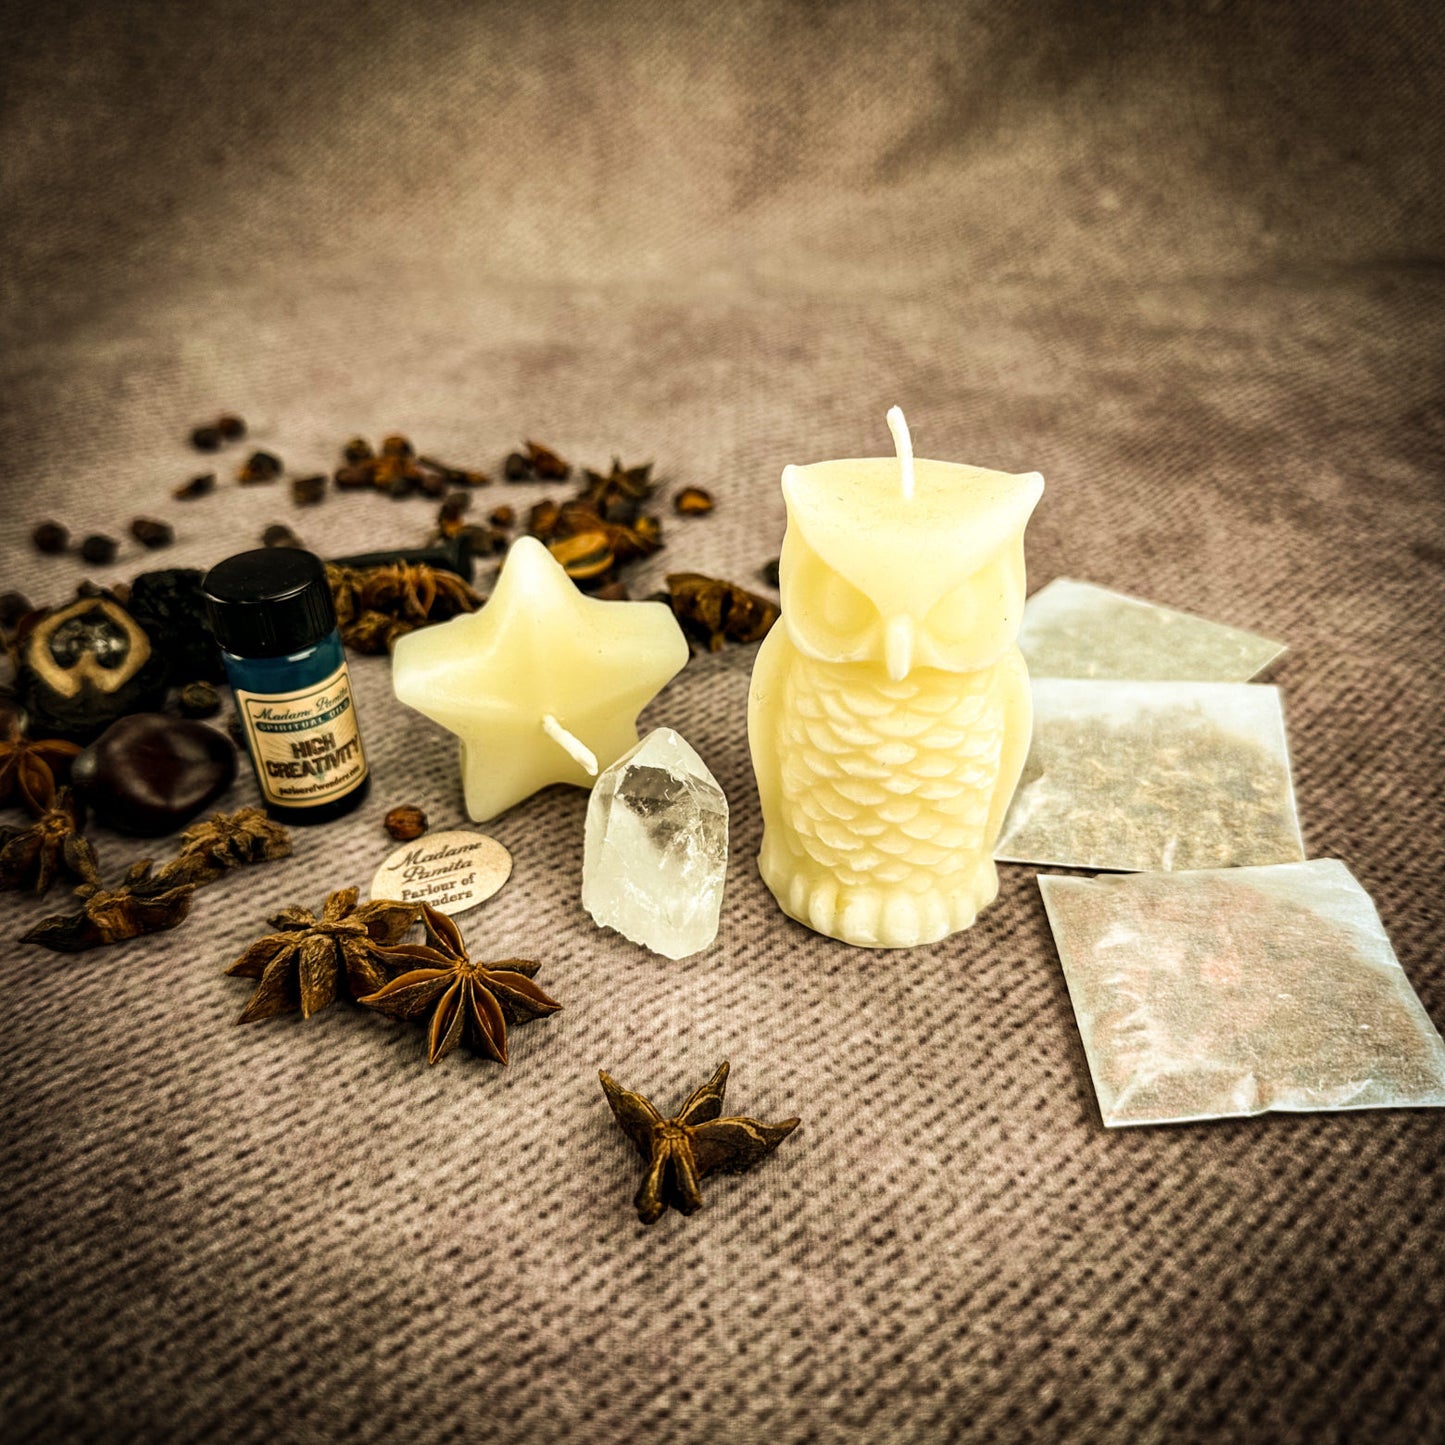 Wise Owl Wishing Star Candle Spell Kit